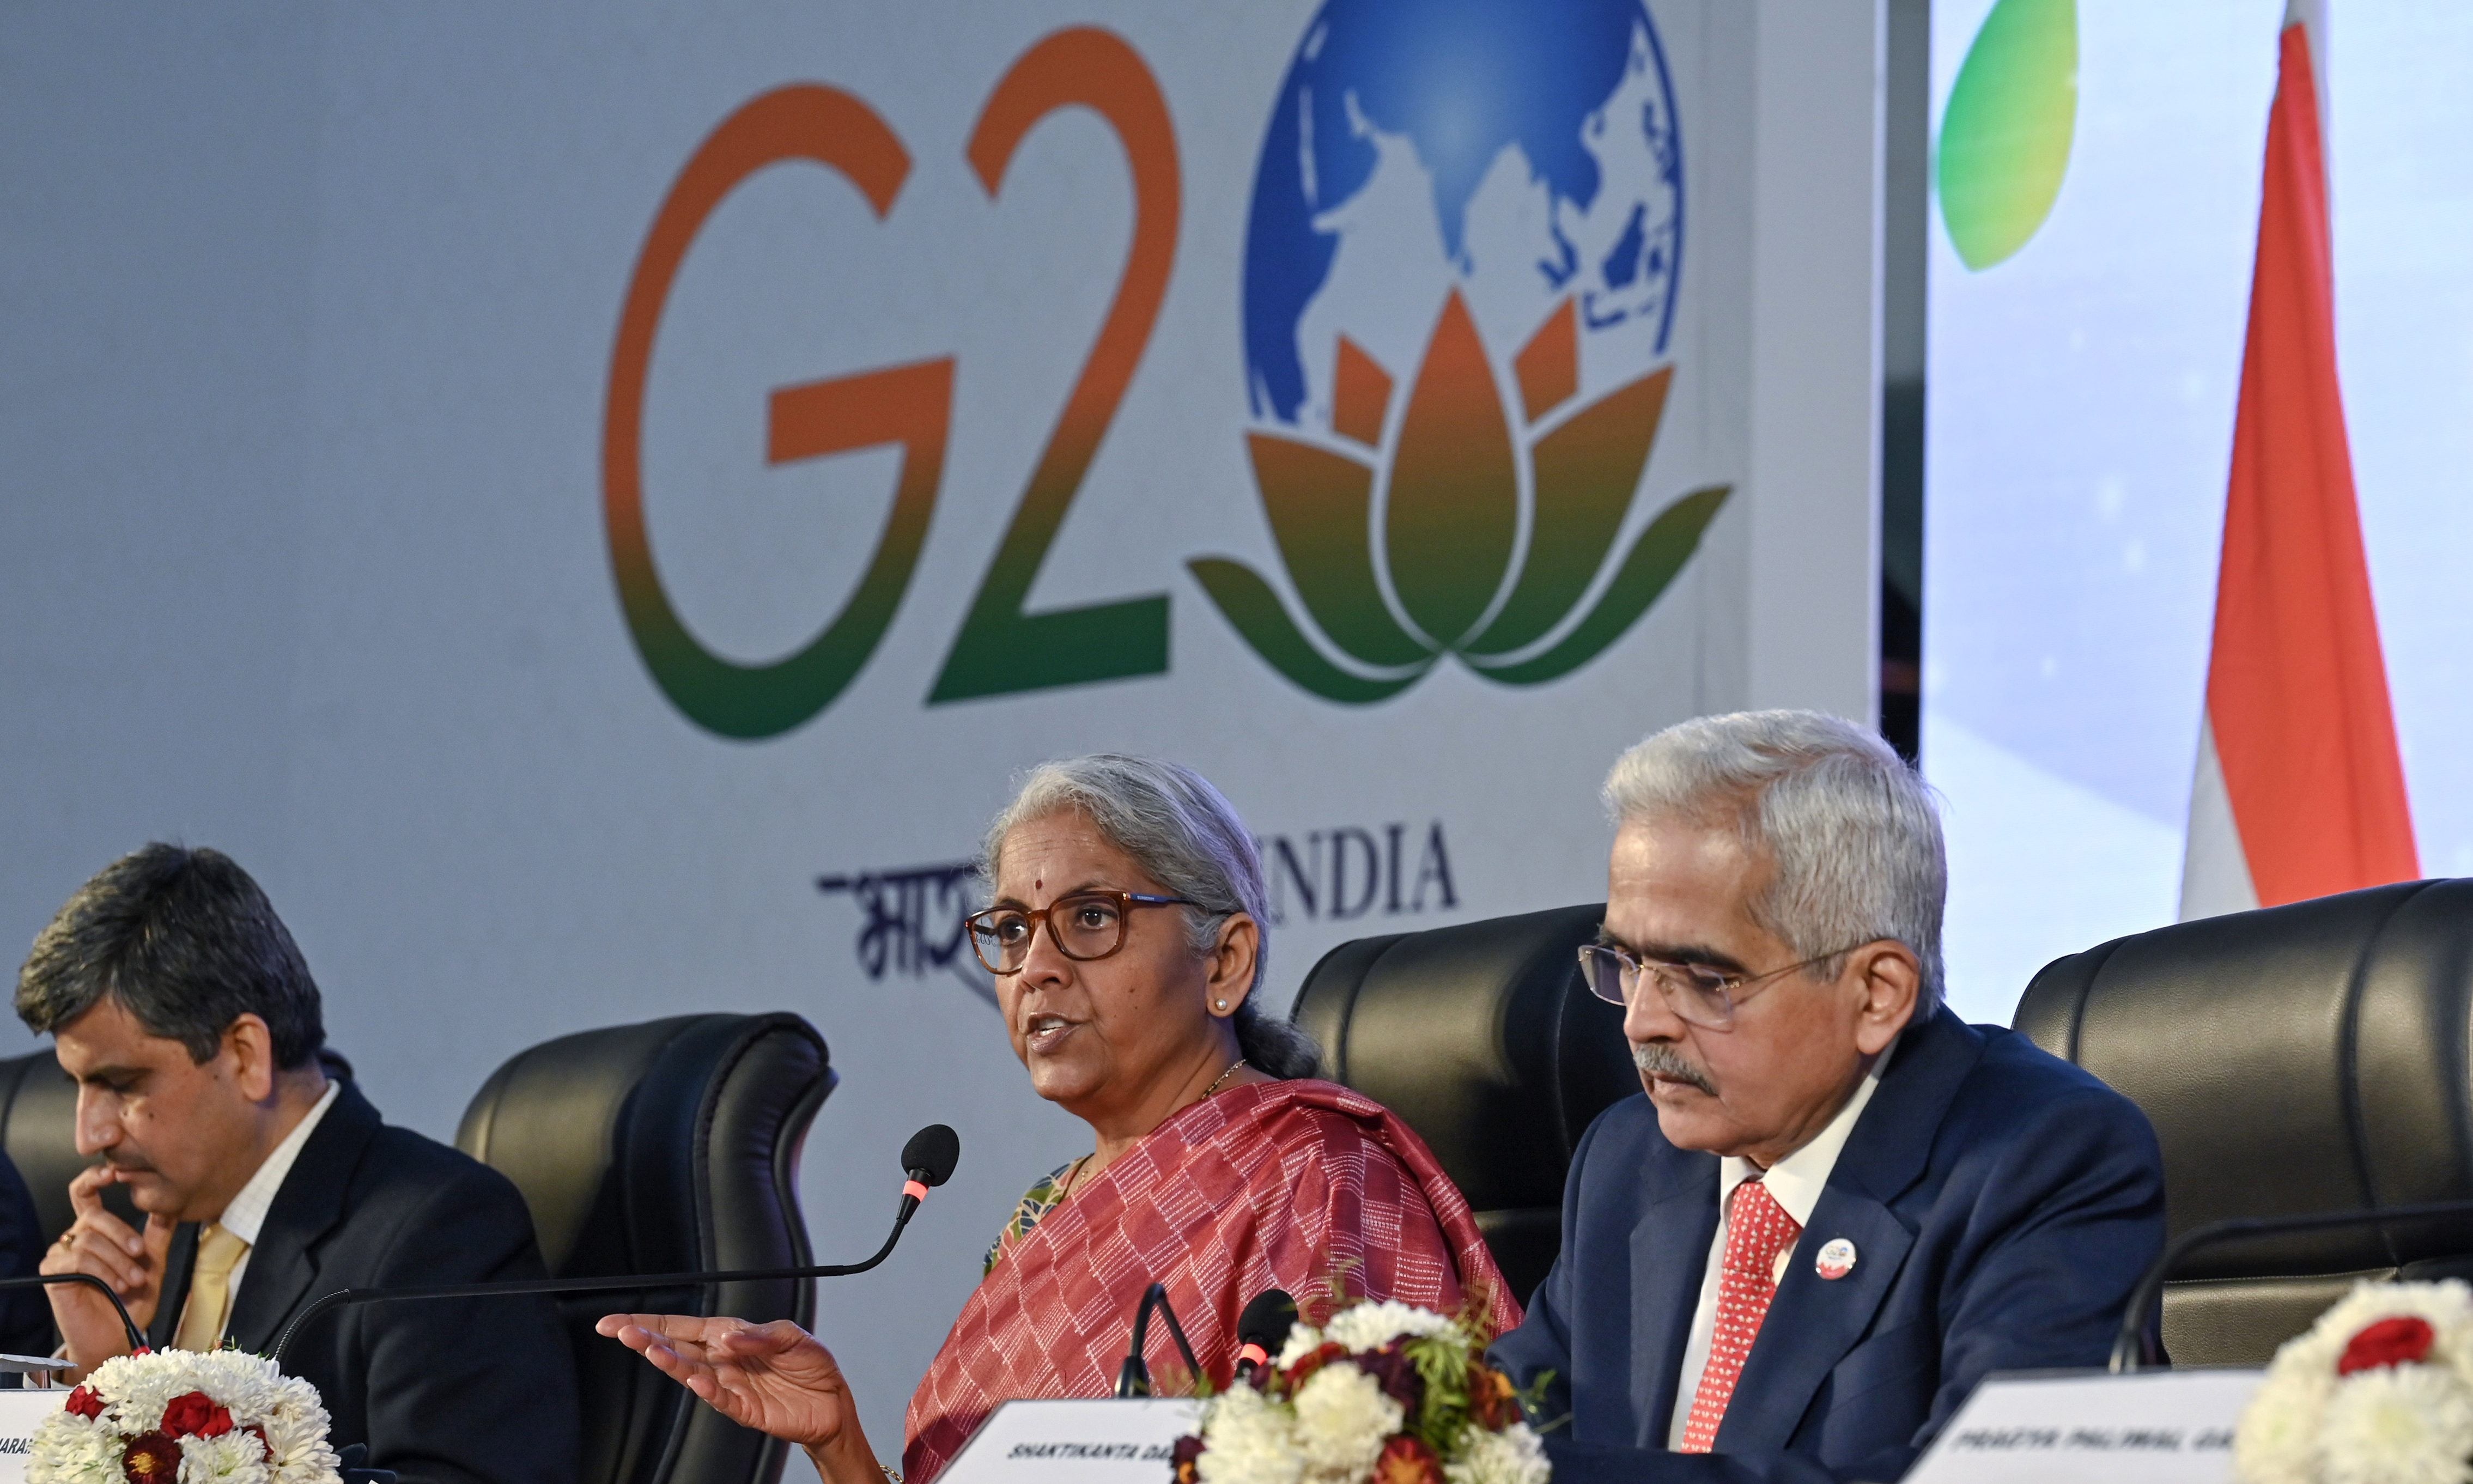 BENGALURU, India: India’s Finance Minister Nirmala Sitaraman (center) addressing a press conference along with the Governor of Reserve Bank of India, Shaktikanta Das (right) and Secretary, Department of Economic Affairs, Ministry of Finance Ajay Seth (left) after the G20 Finance meetings in Bengaluru on February 25, 2023.— AFP